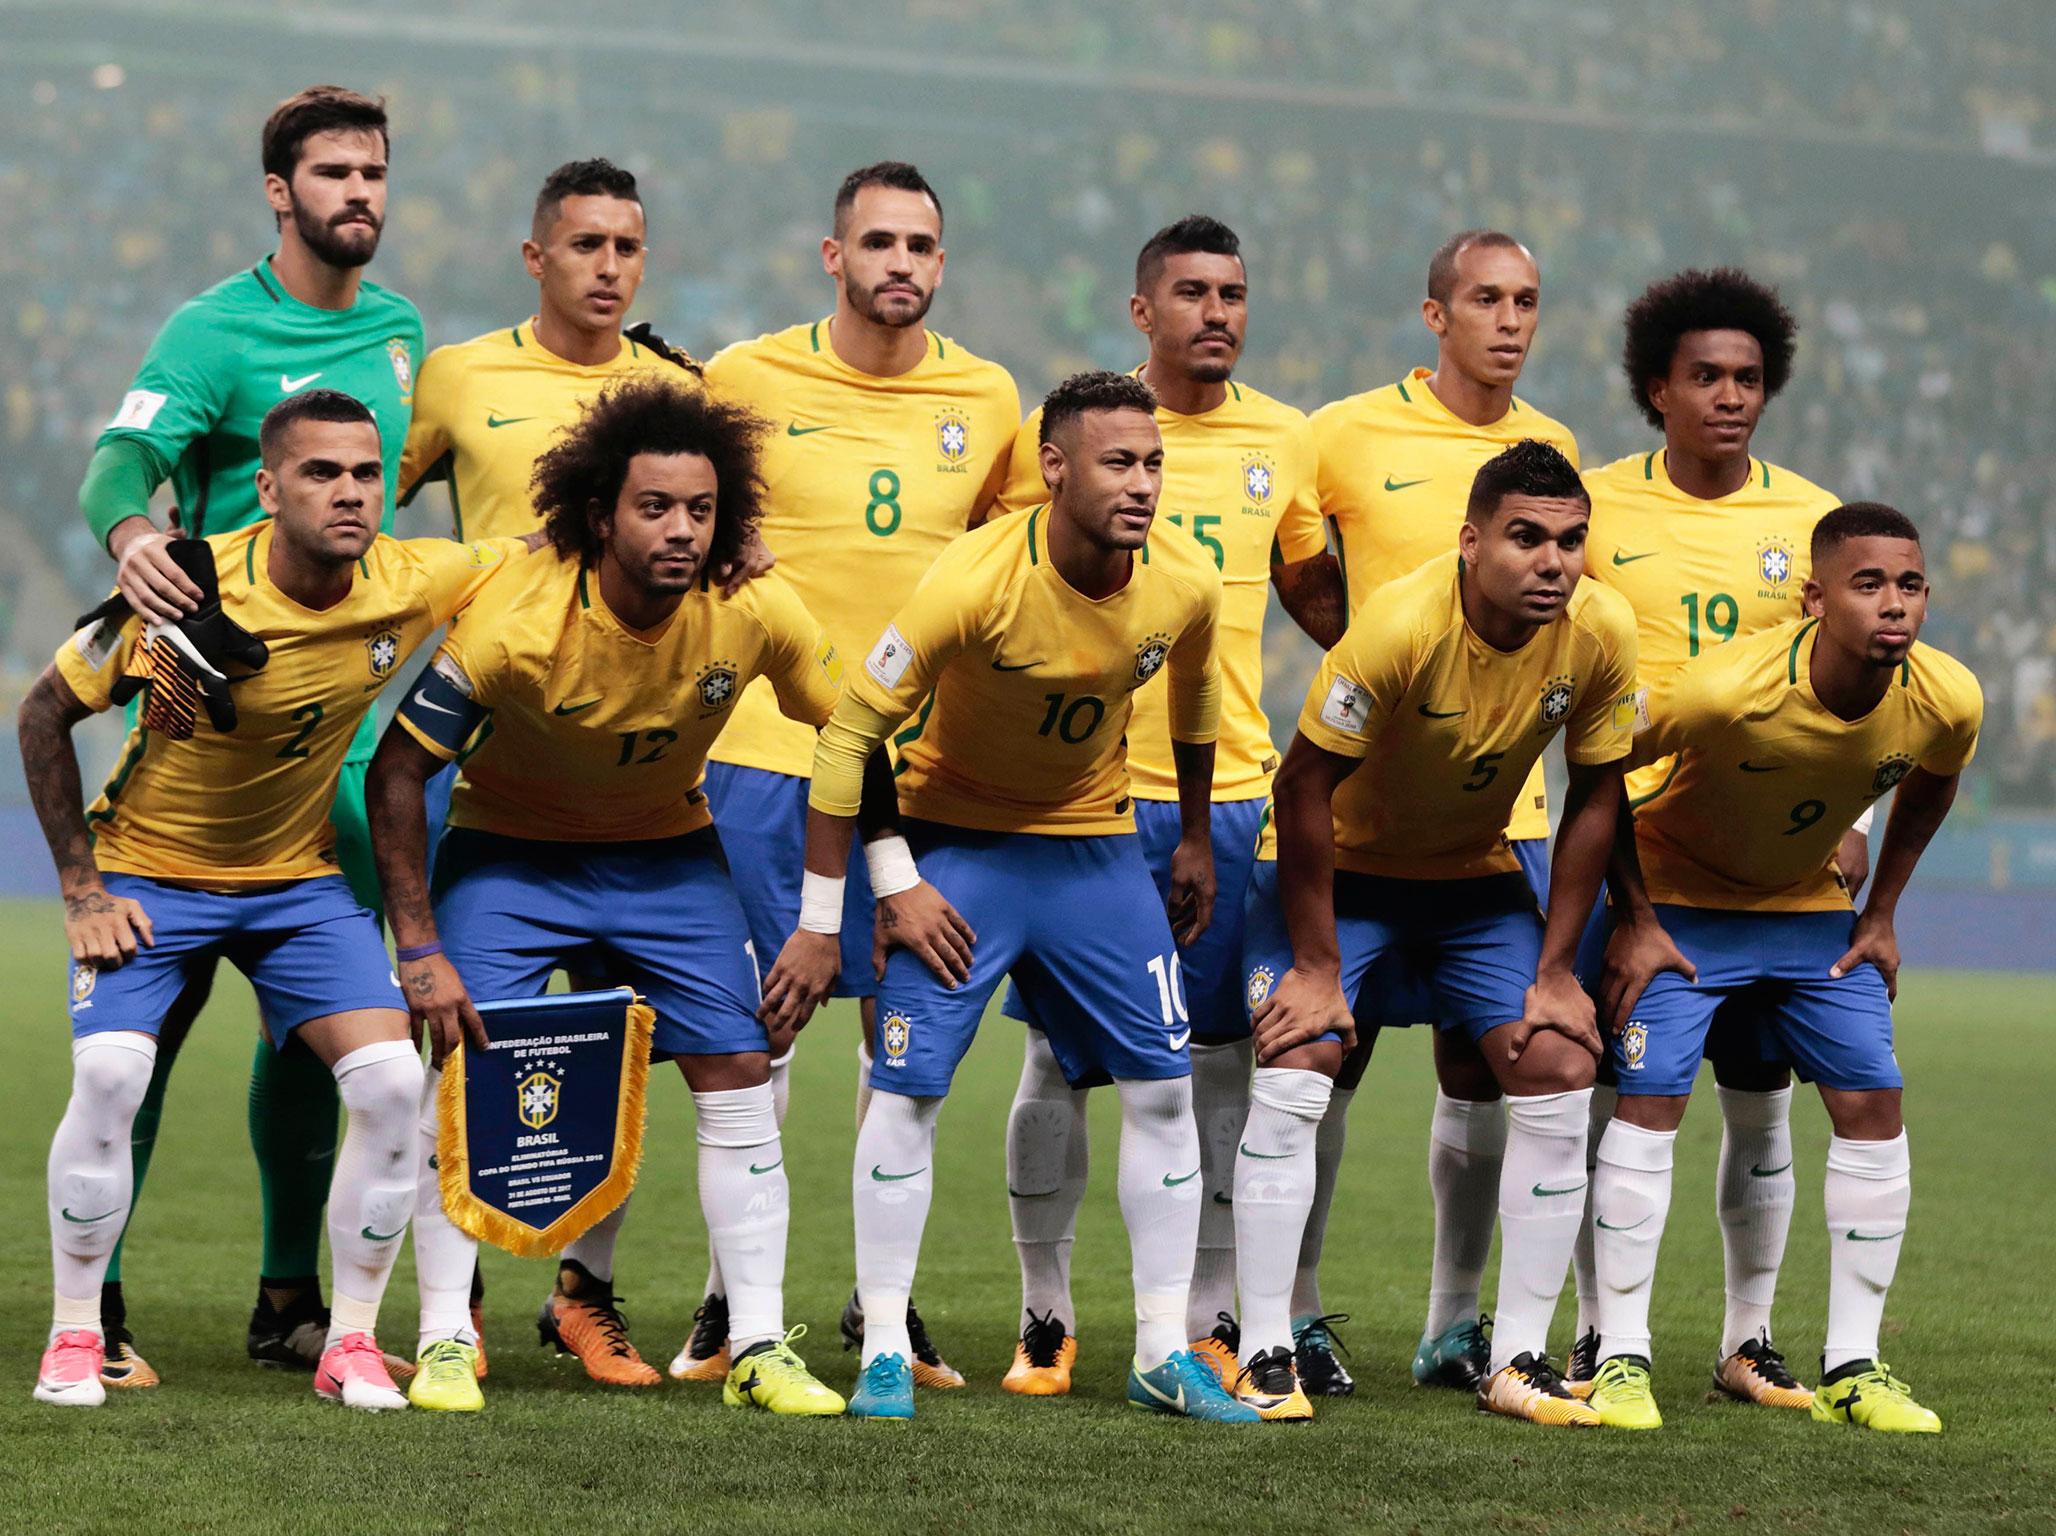 Brazil head into Russia as one of the tournament favourites